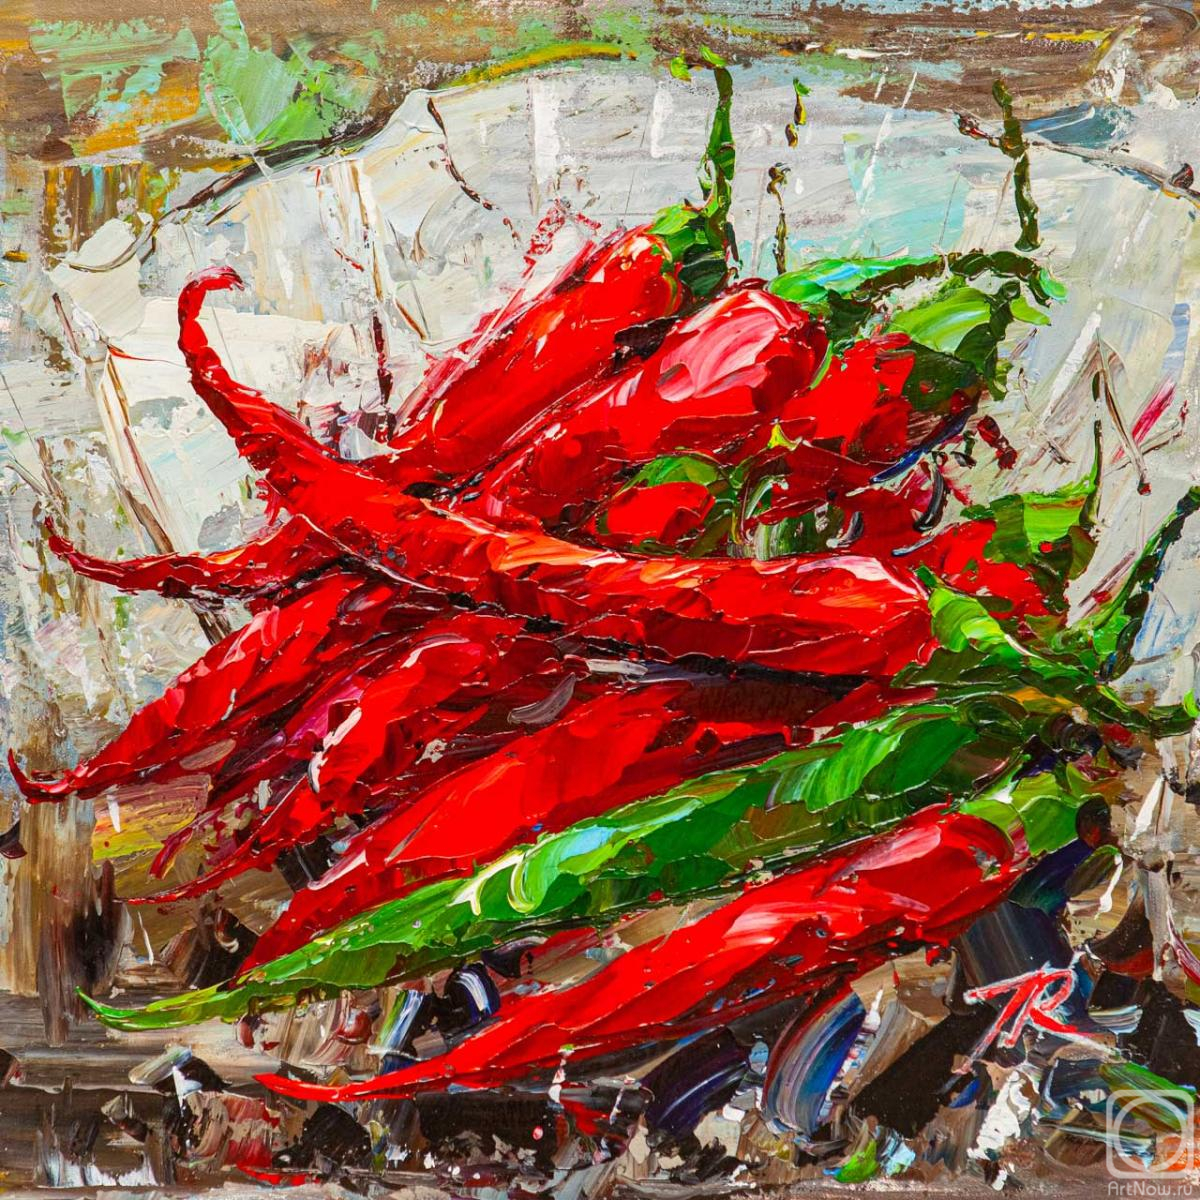 Rodries Jose. Still life with hot peppers